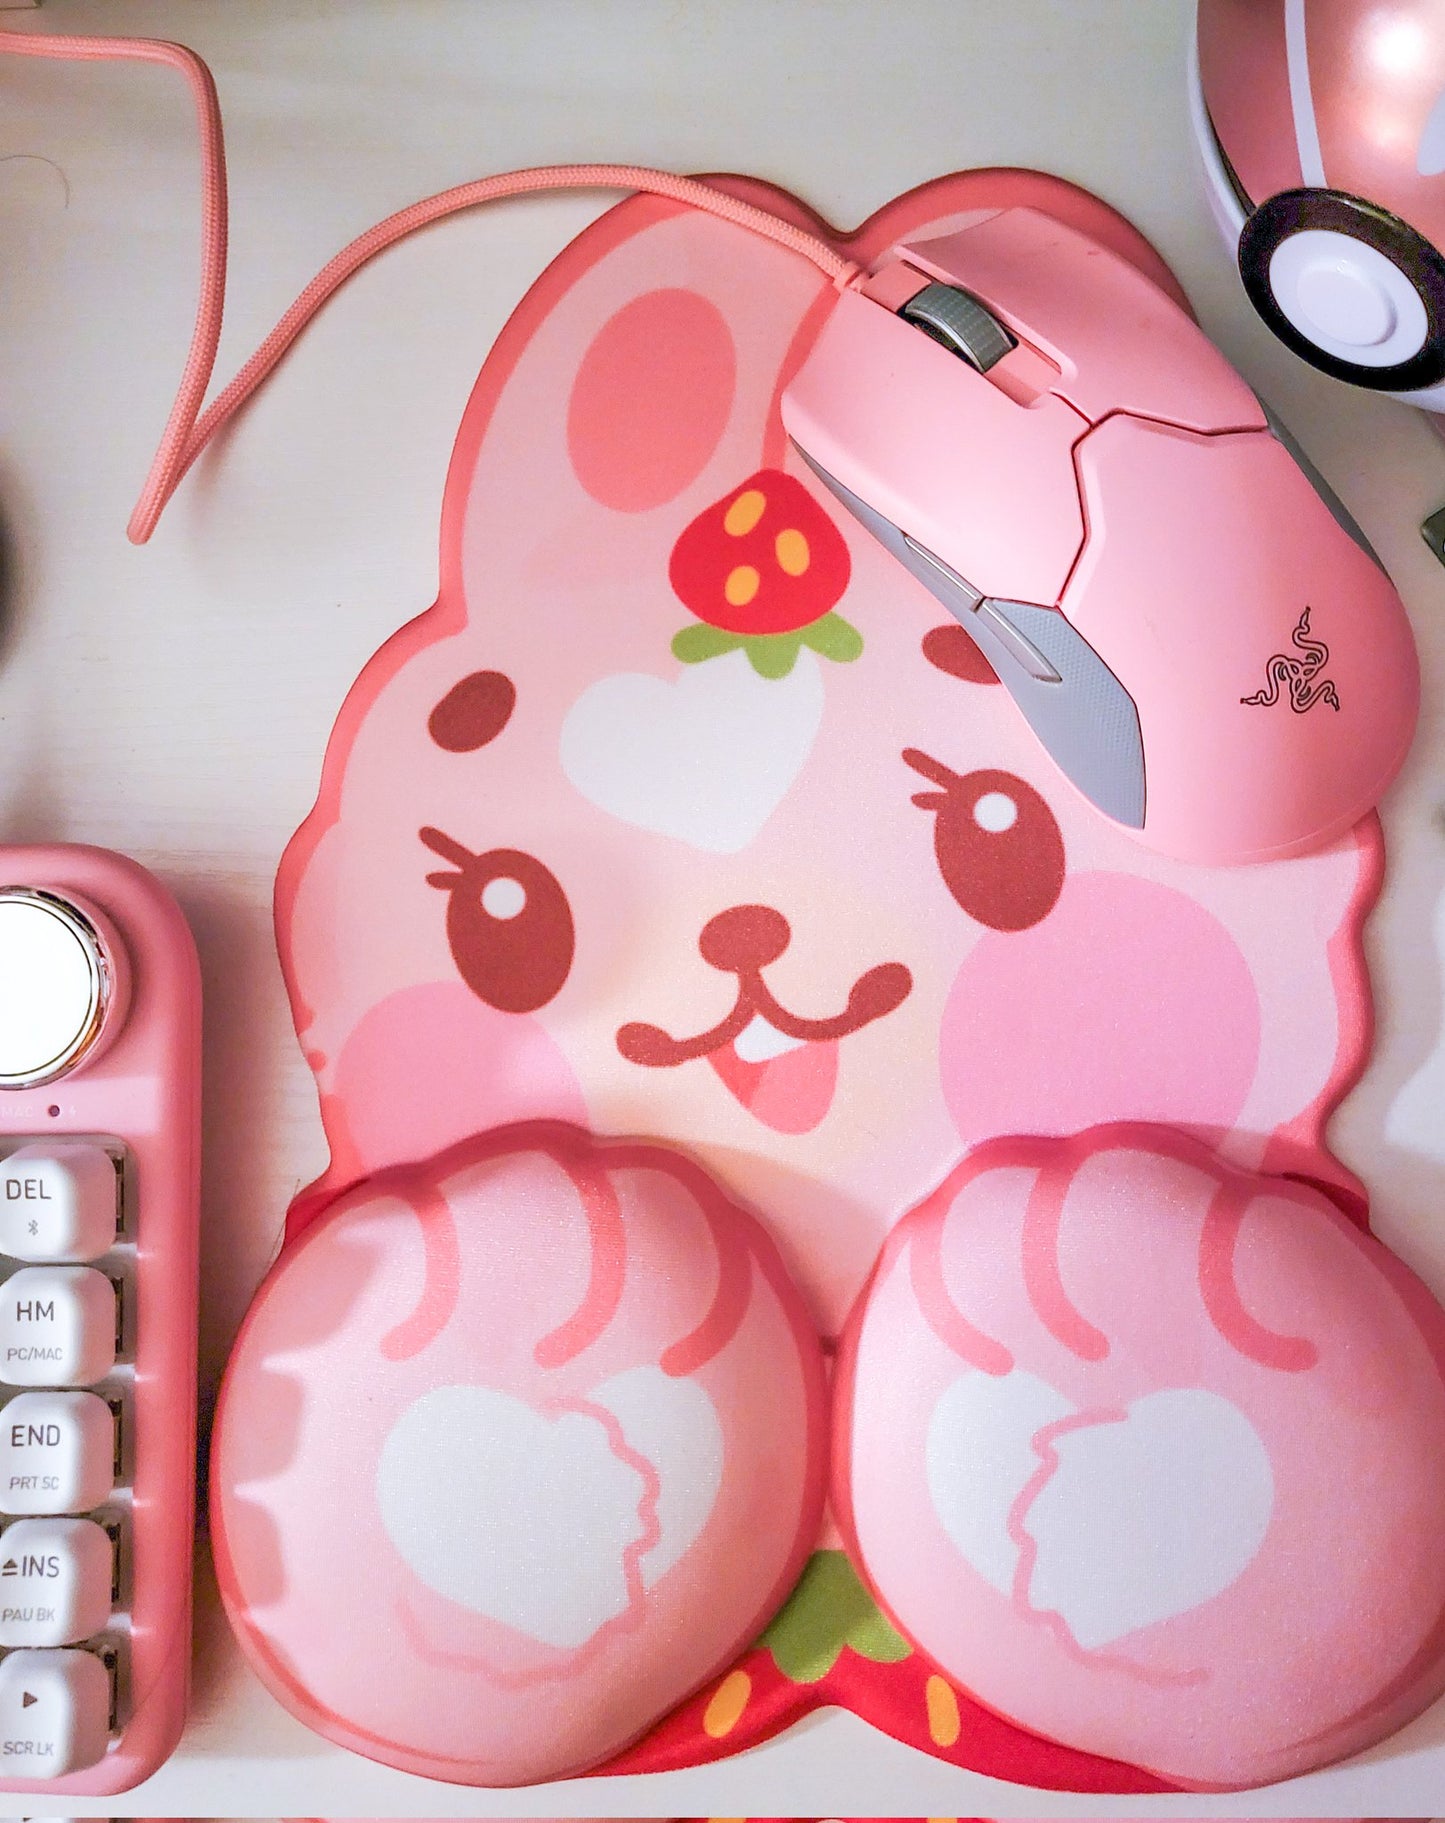 Strawbunny "Paws-Out" Wrist Rest MousePad